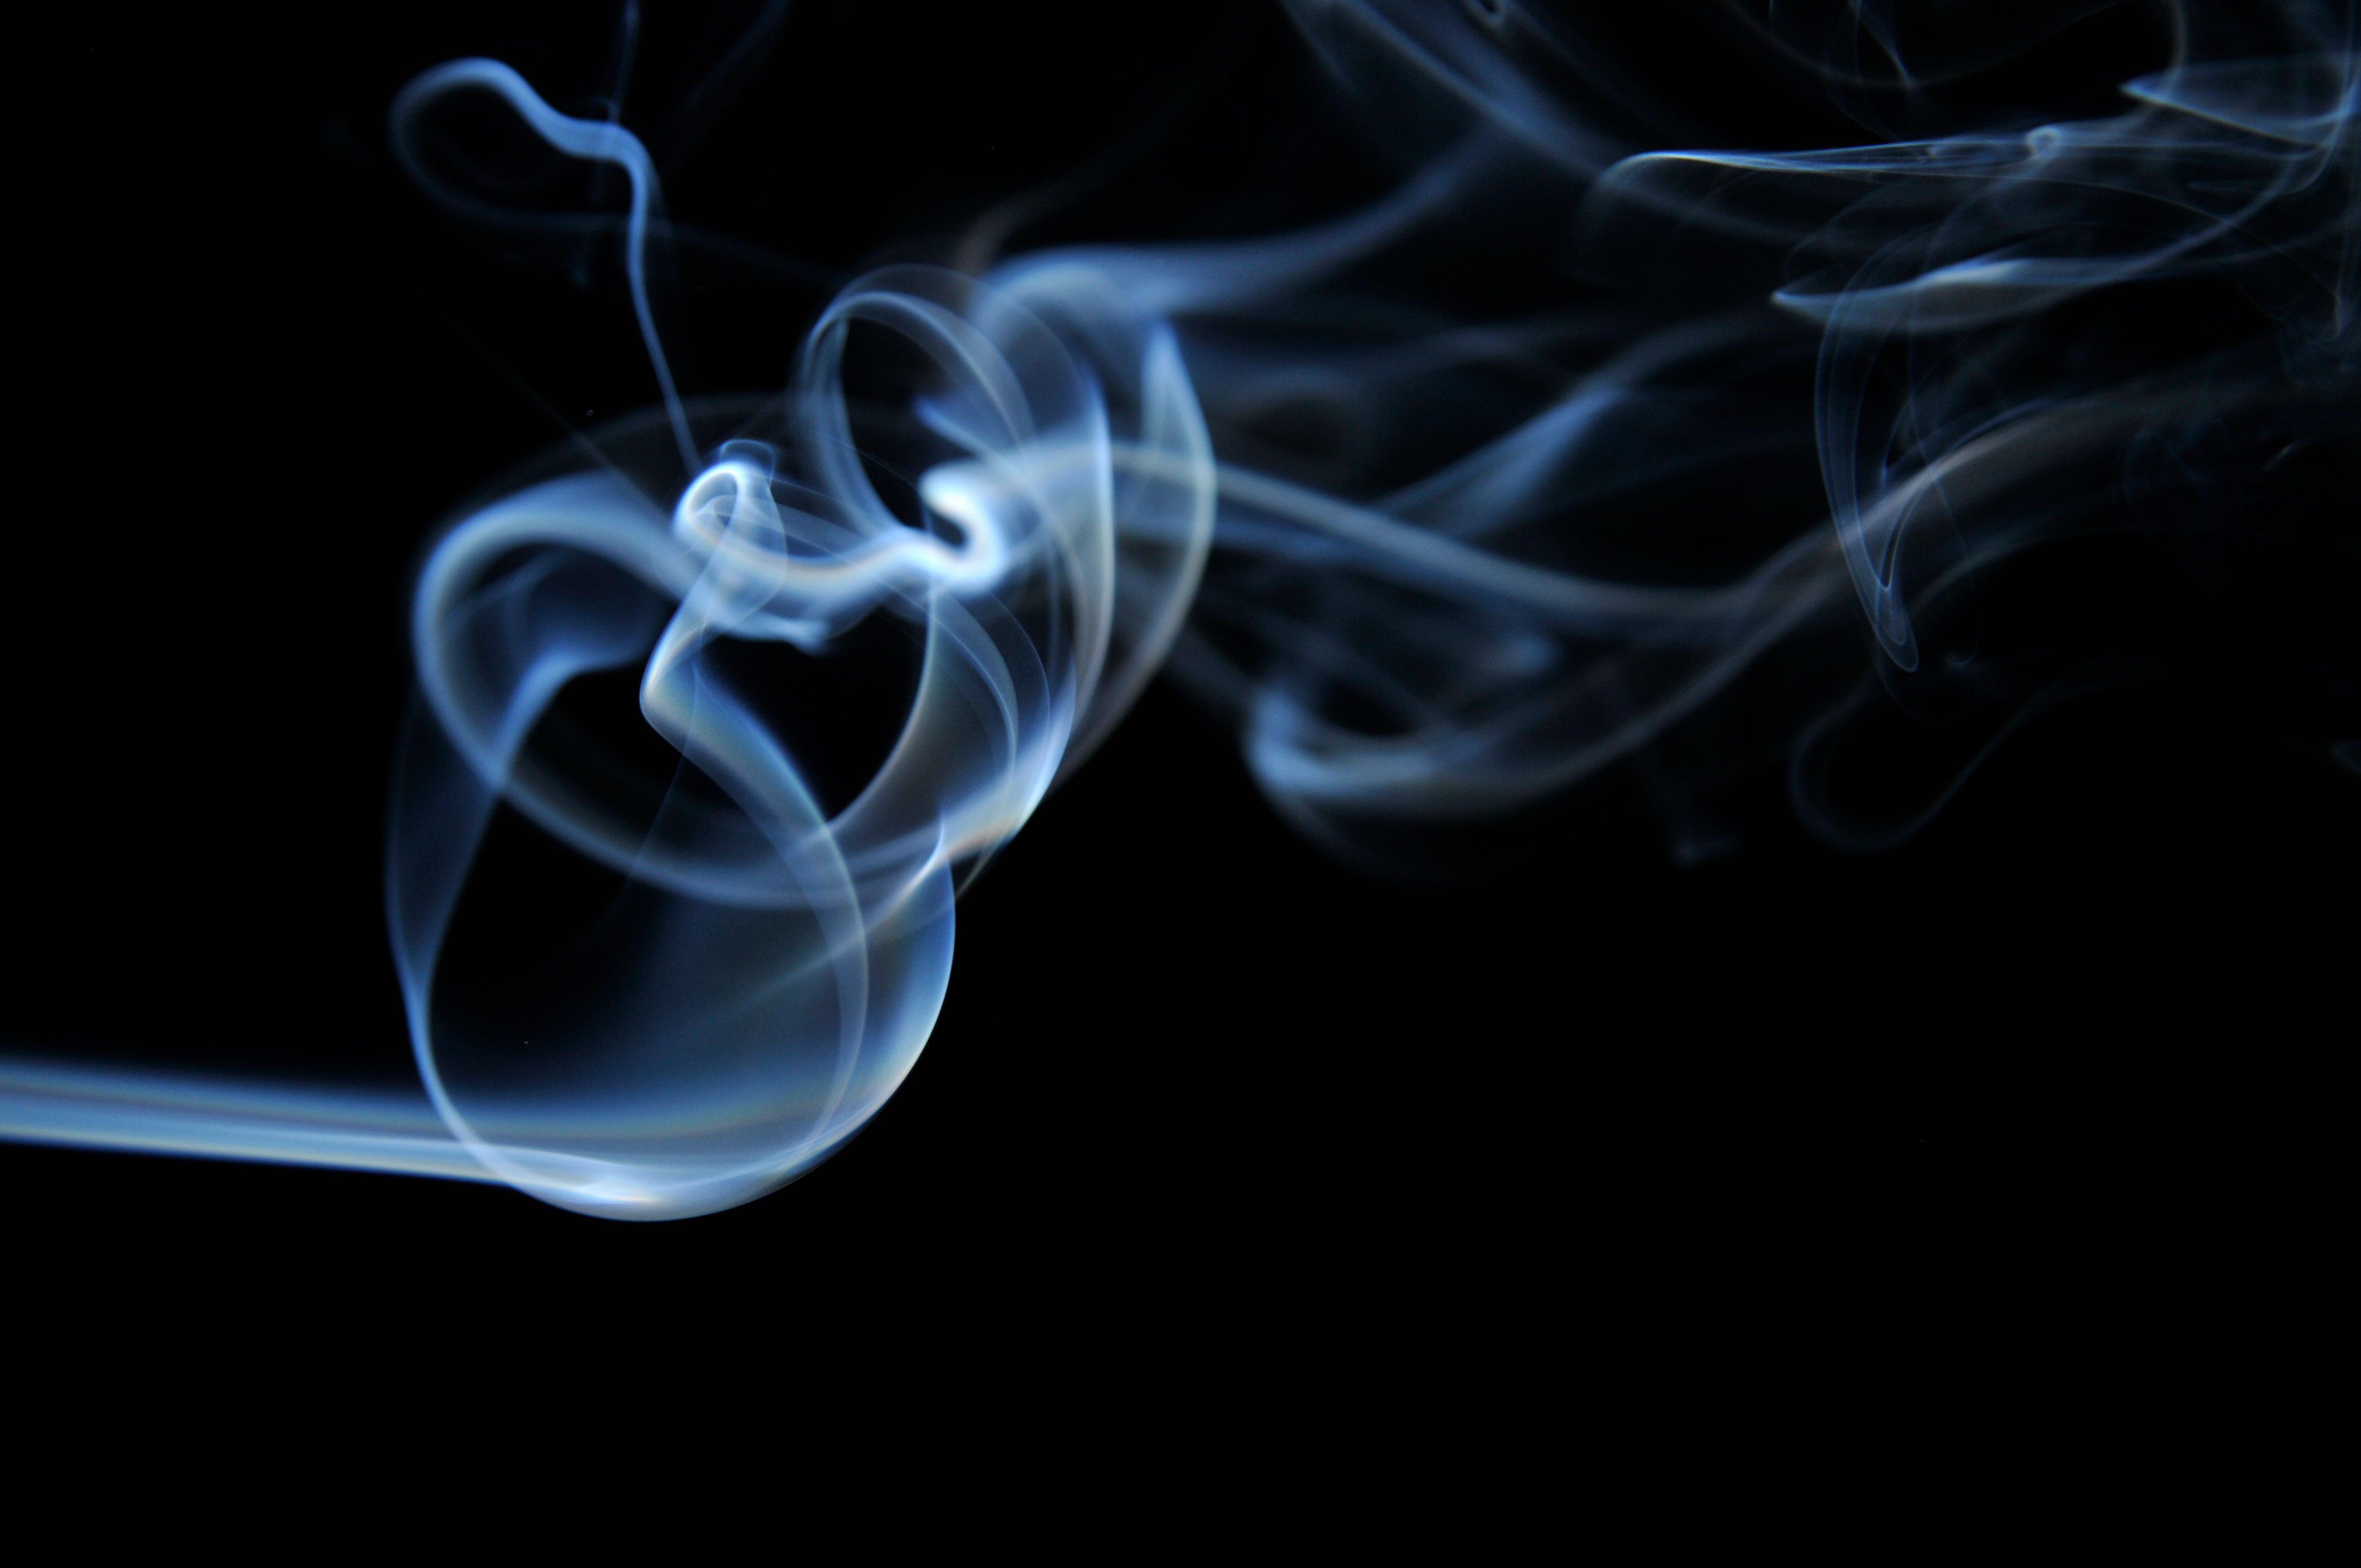 Colour your incense smoke photographs in Photoshop